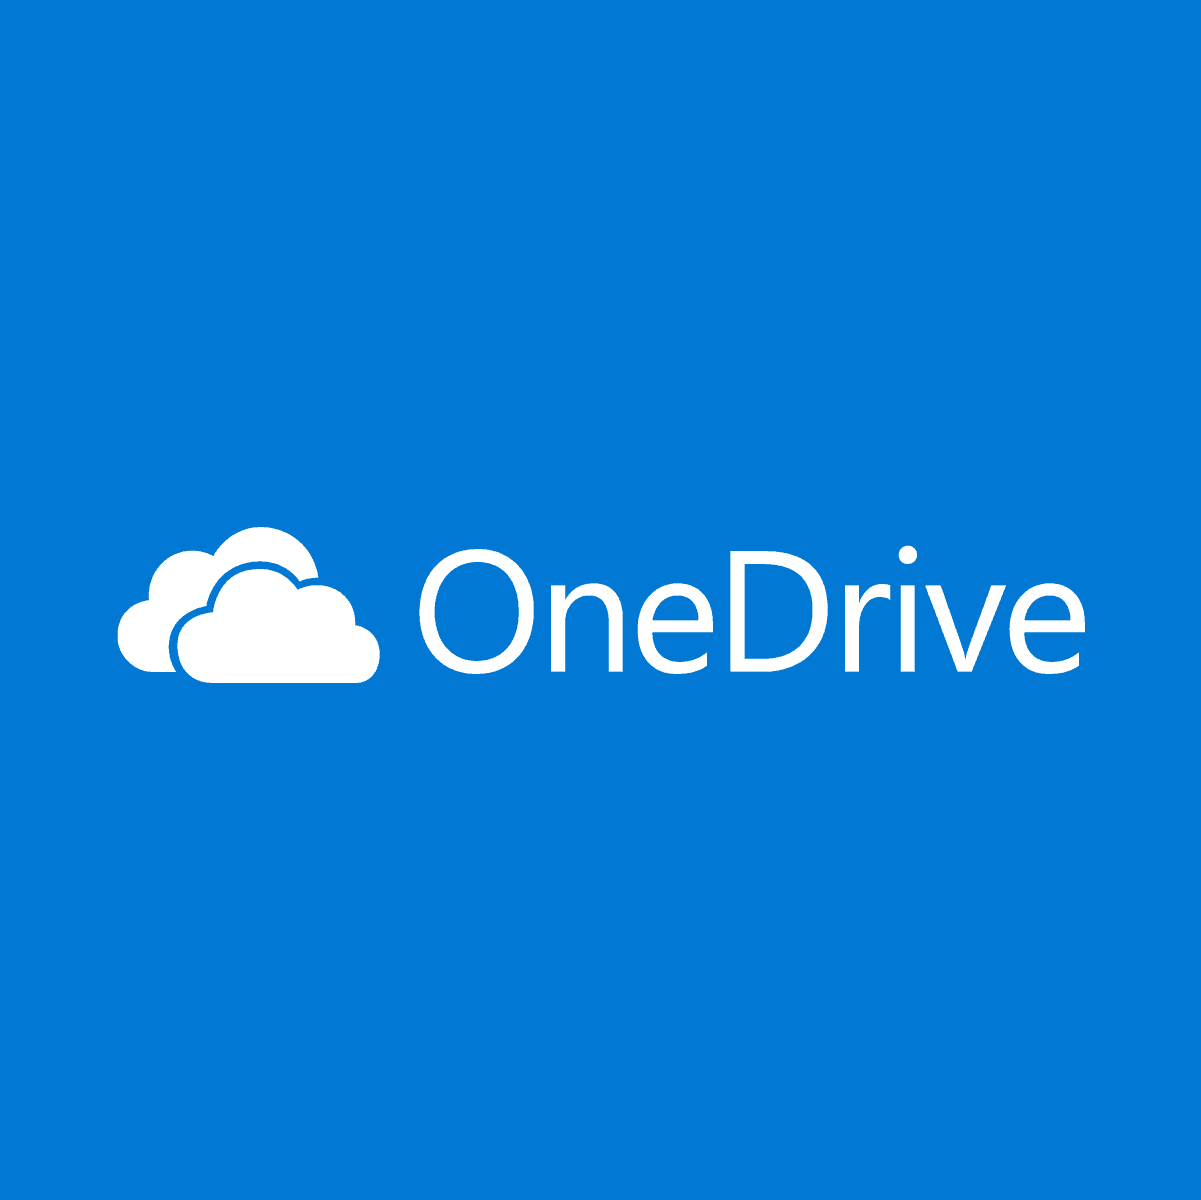 onedrive download shared video